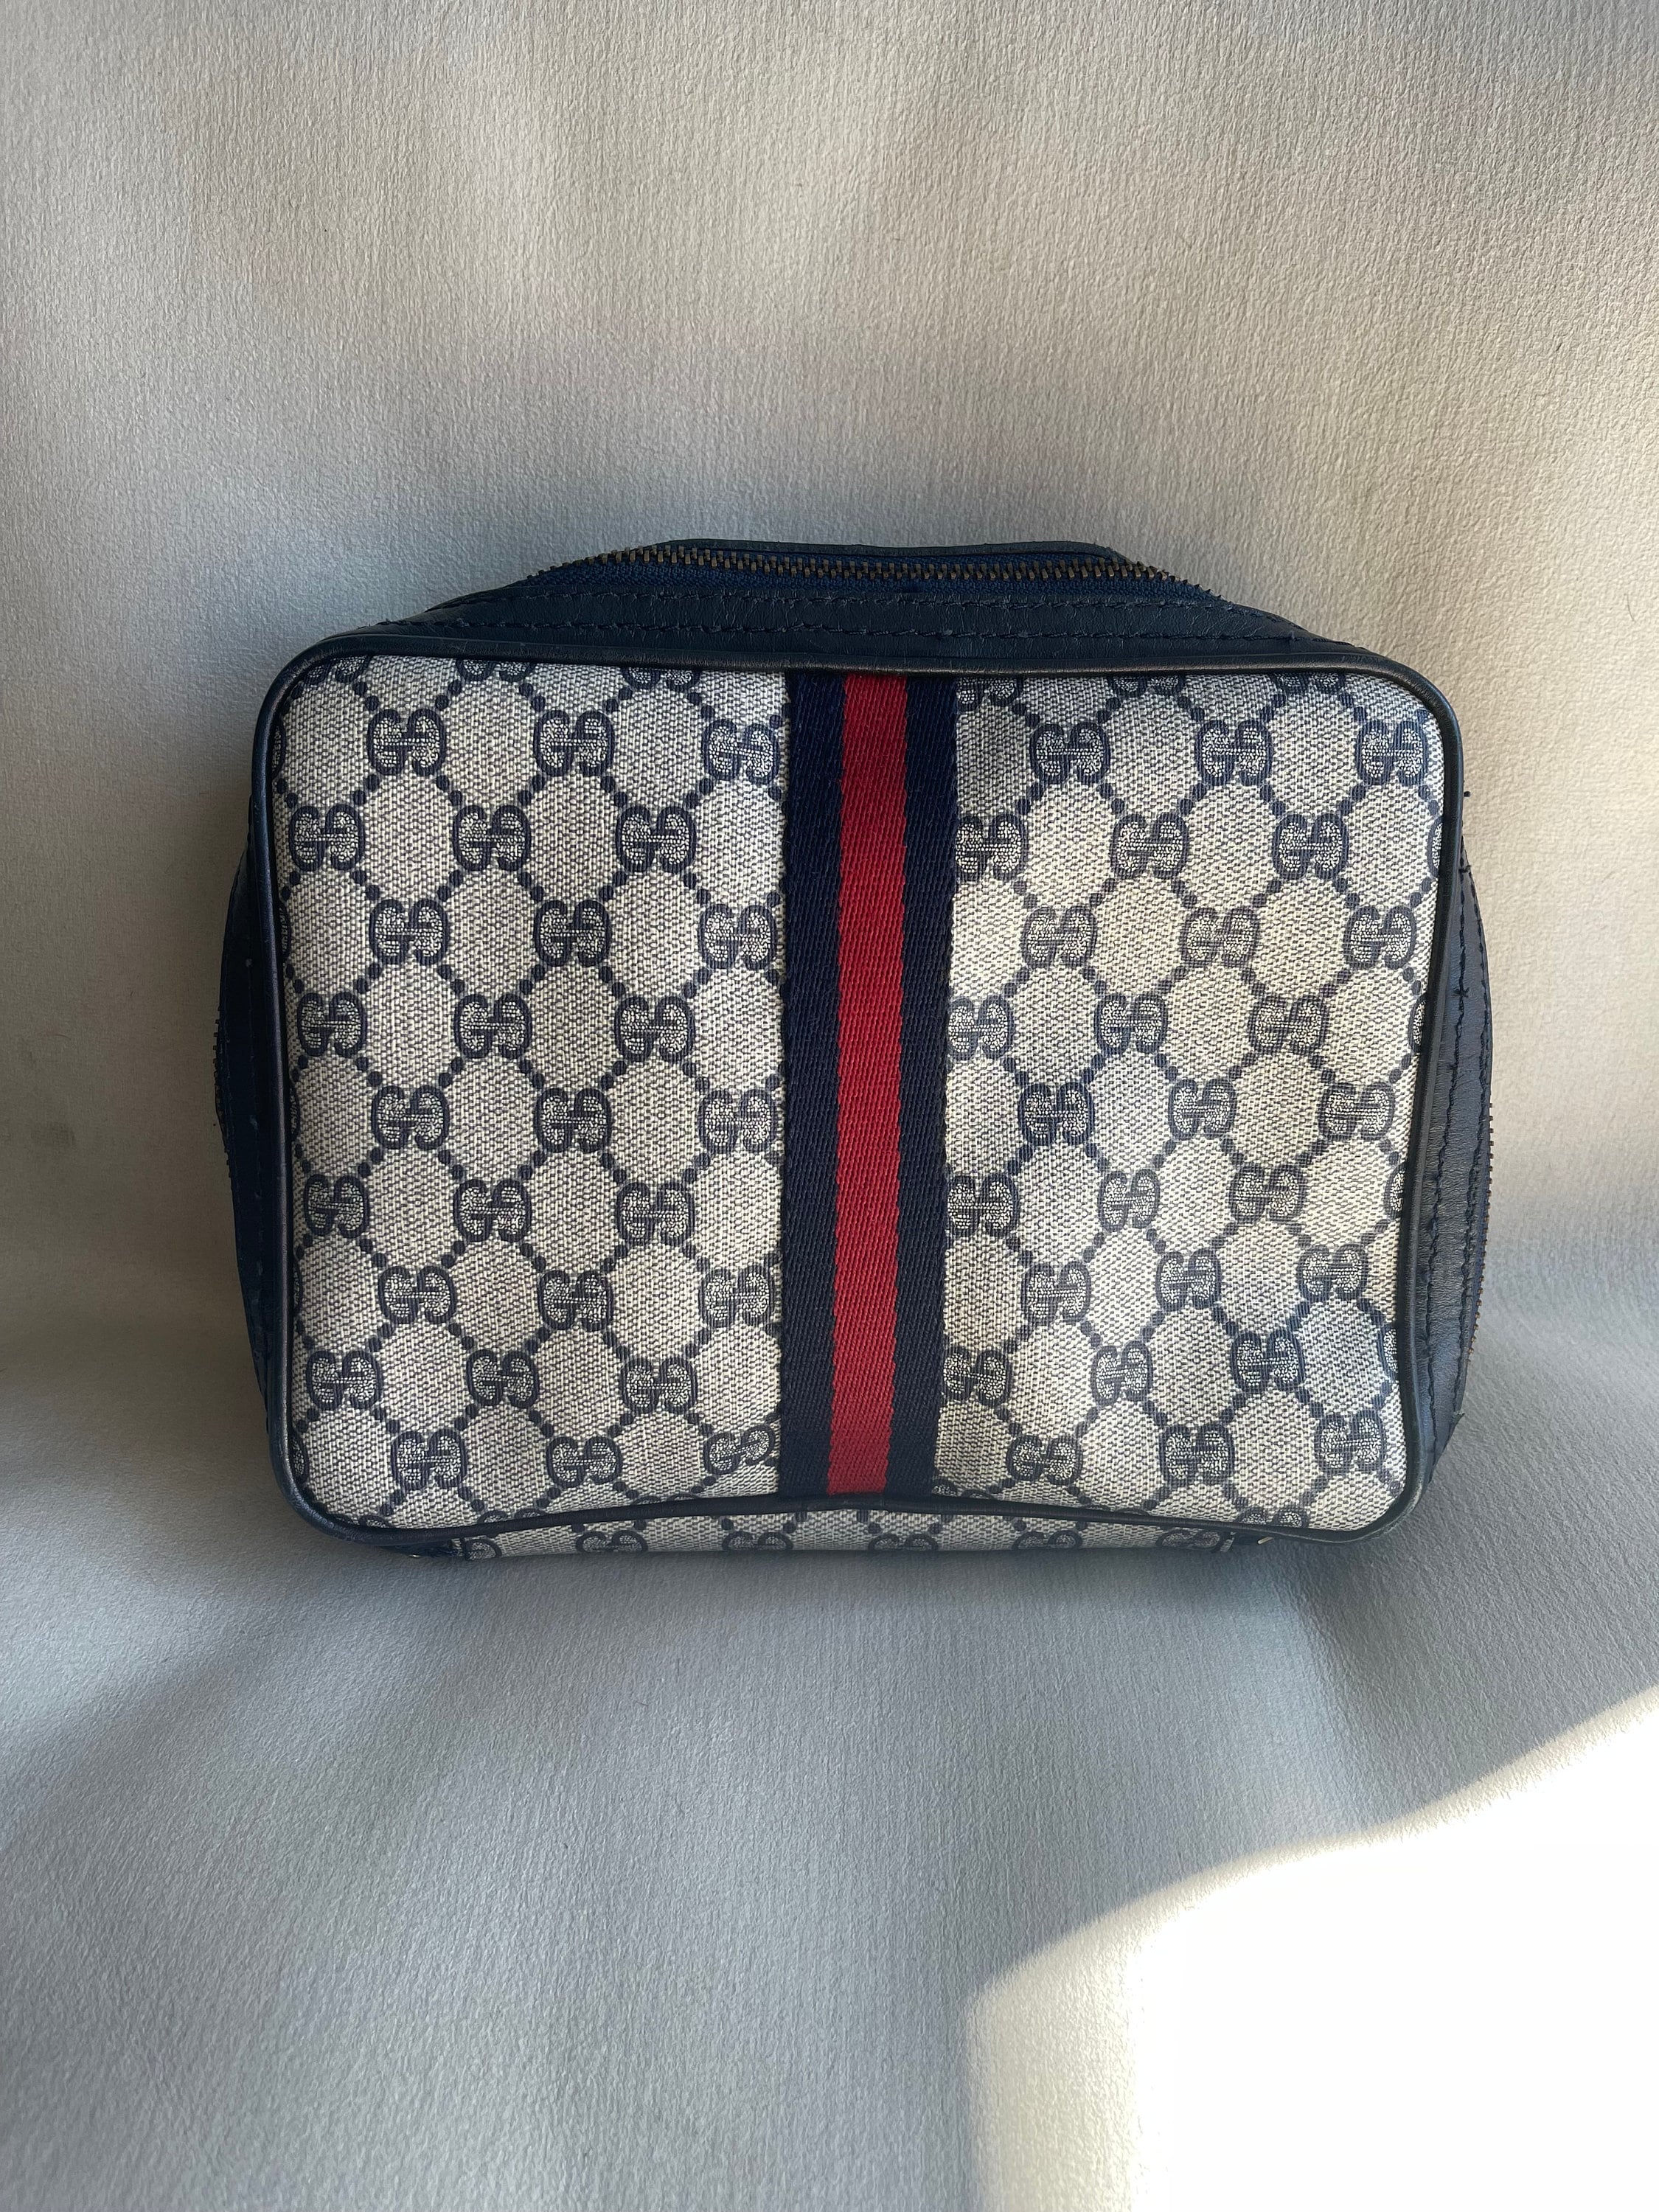 Gucci Makeup Artist Suitcase, Cosmetic Suitcase Leather